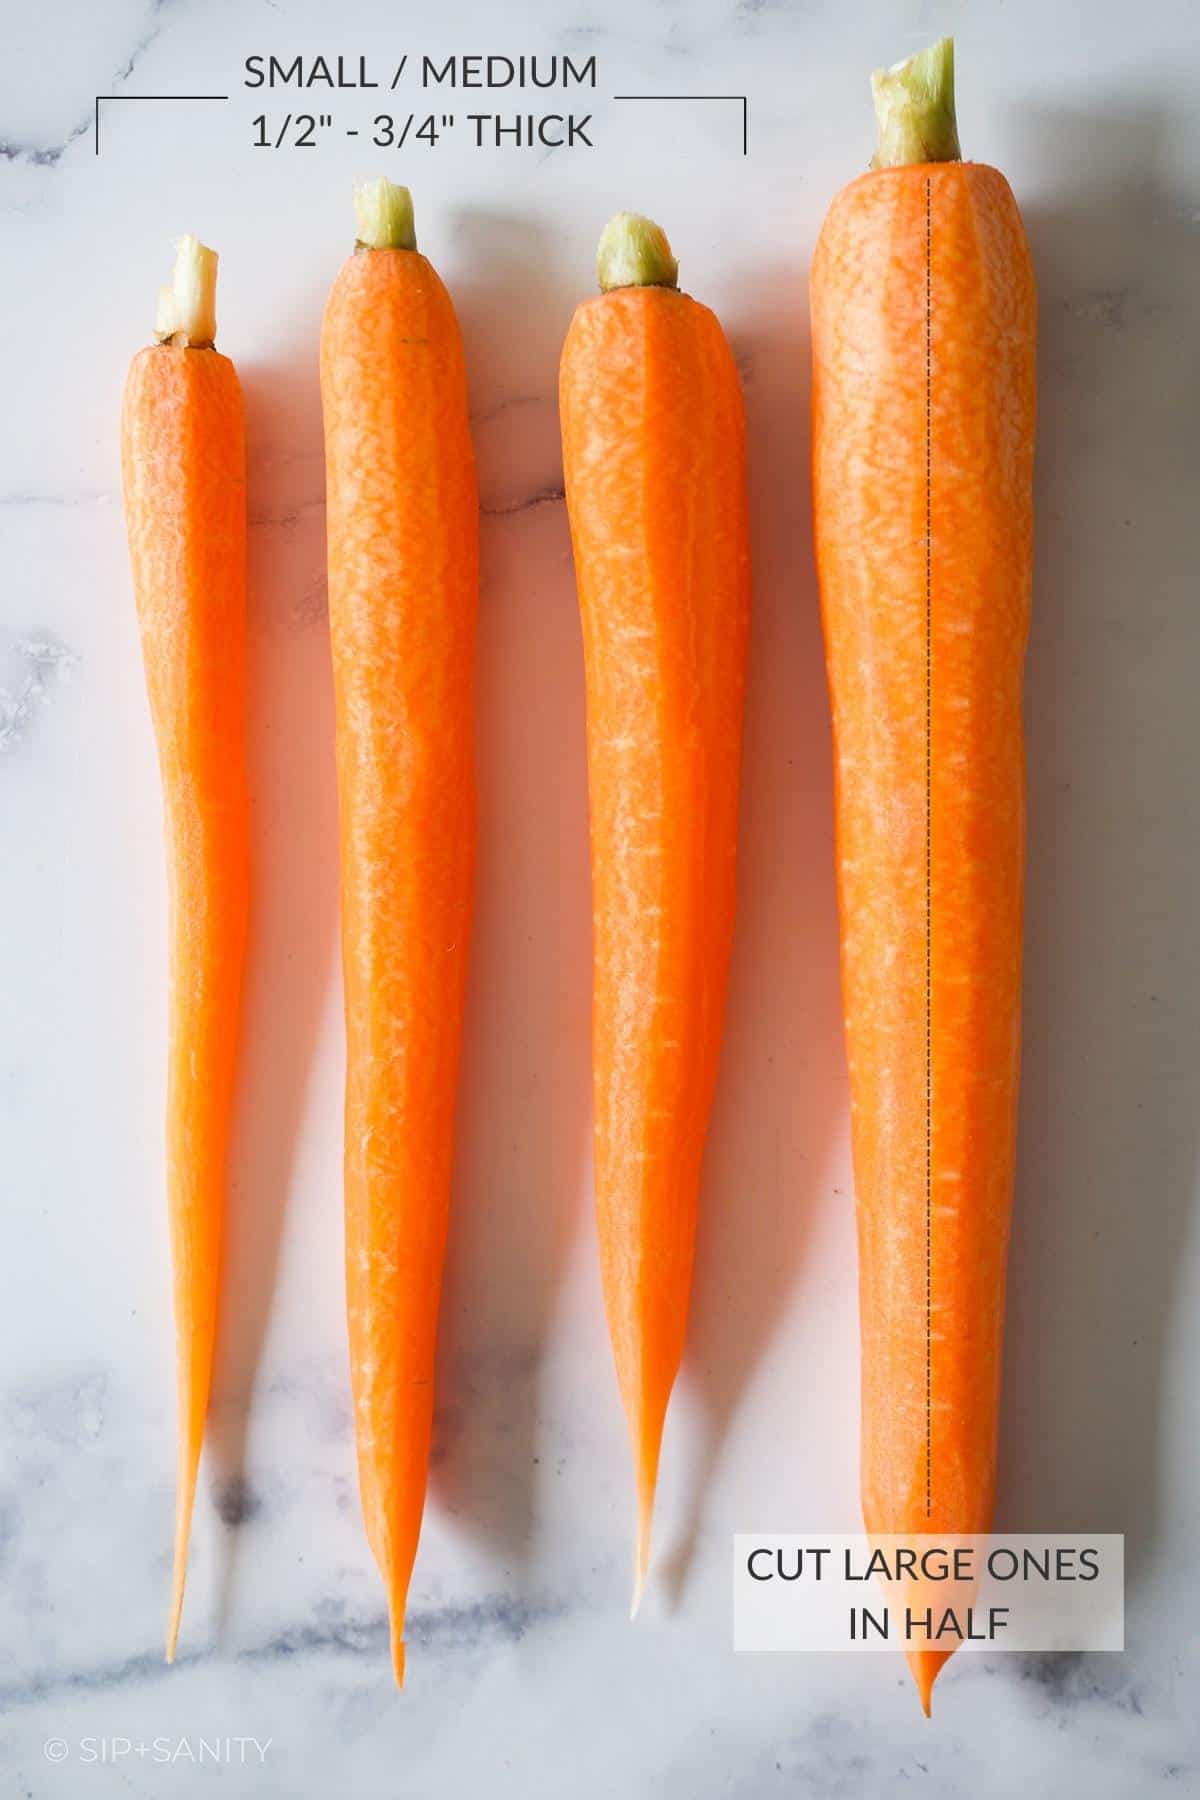 Four carrots of different sizes on a white surface.